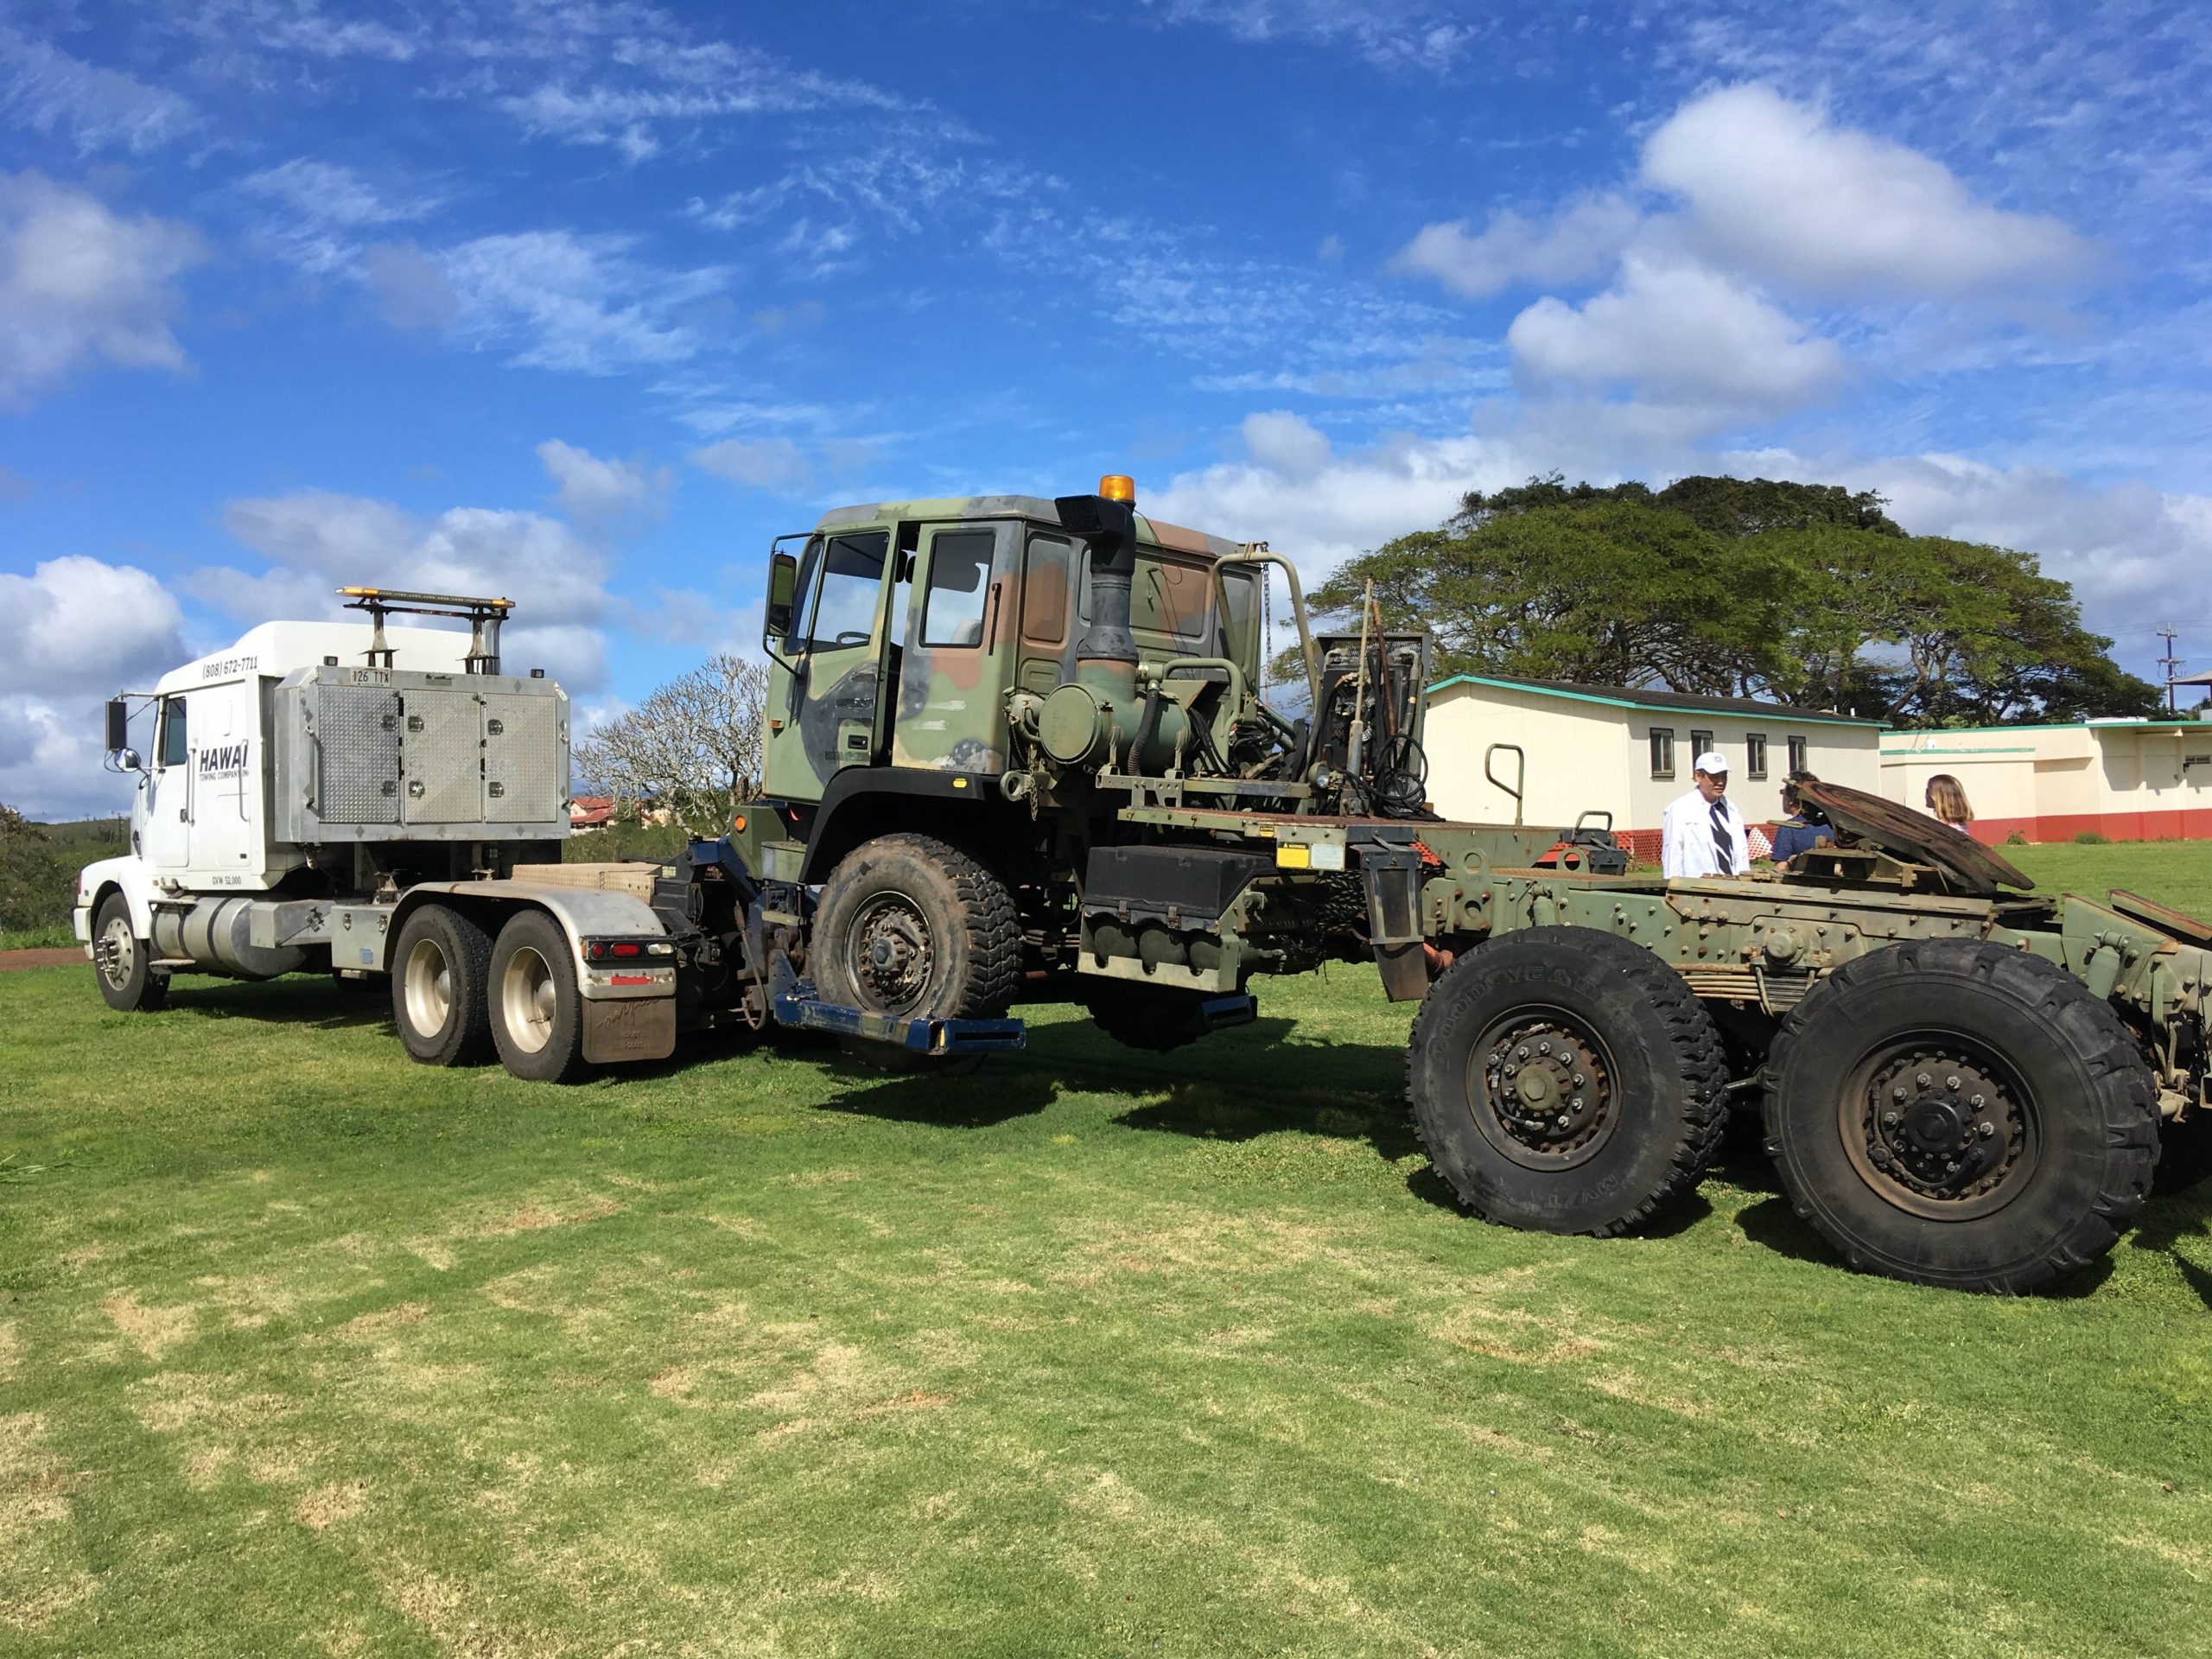 Waipahu’s Roadside Towing: Towing Solutions Tailored to You